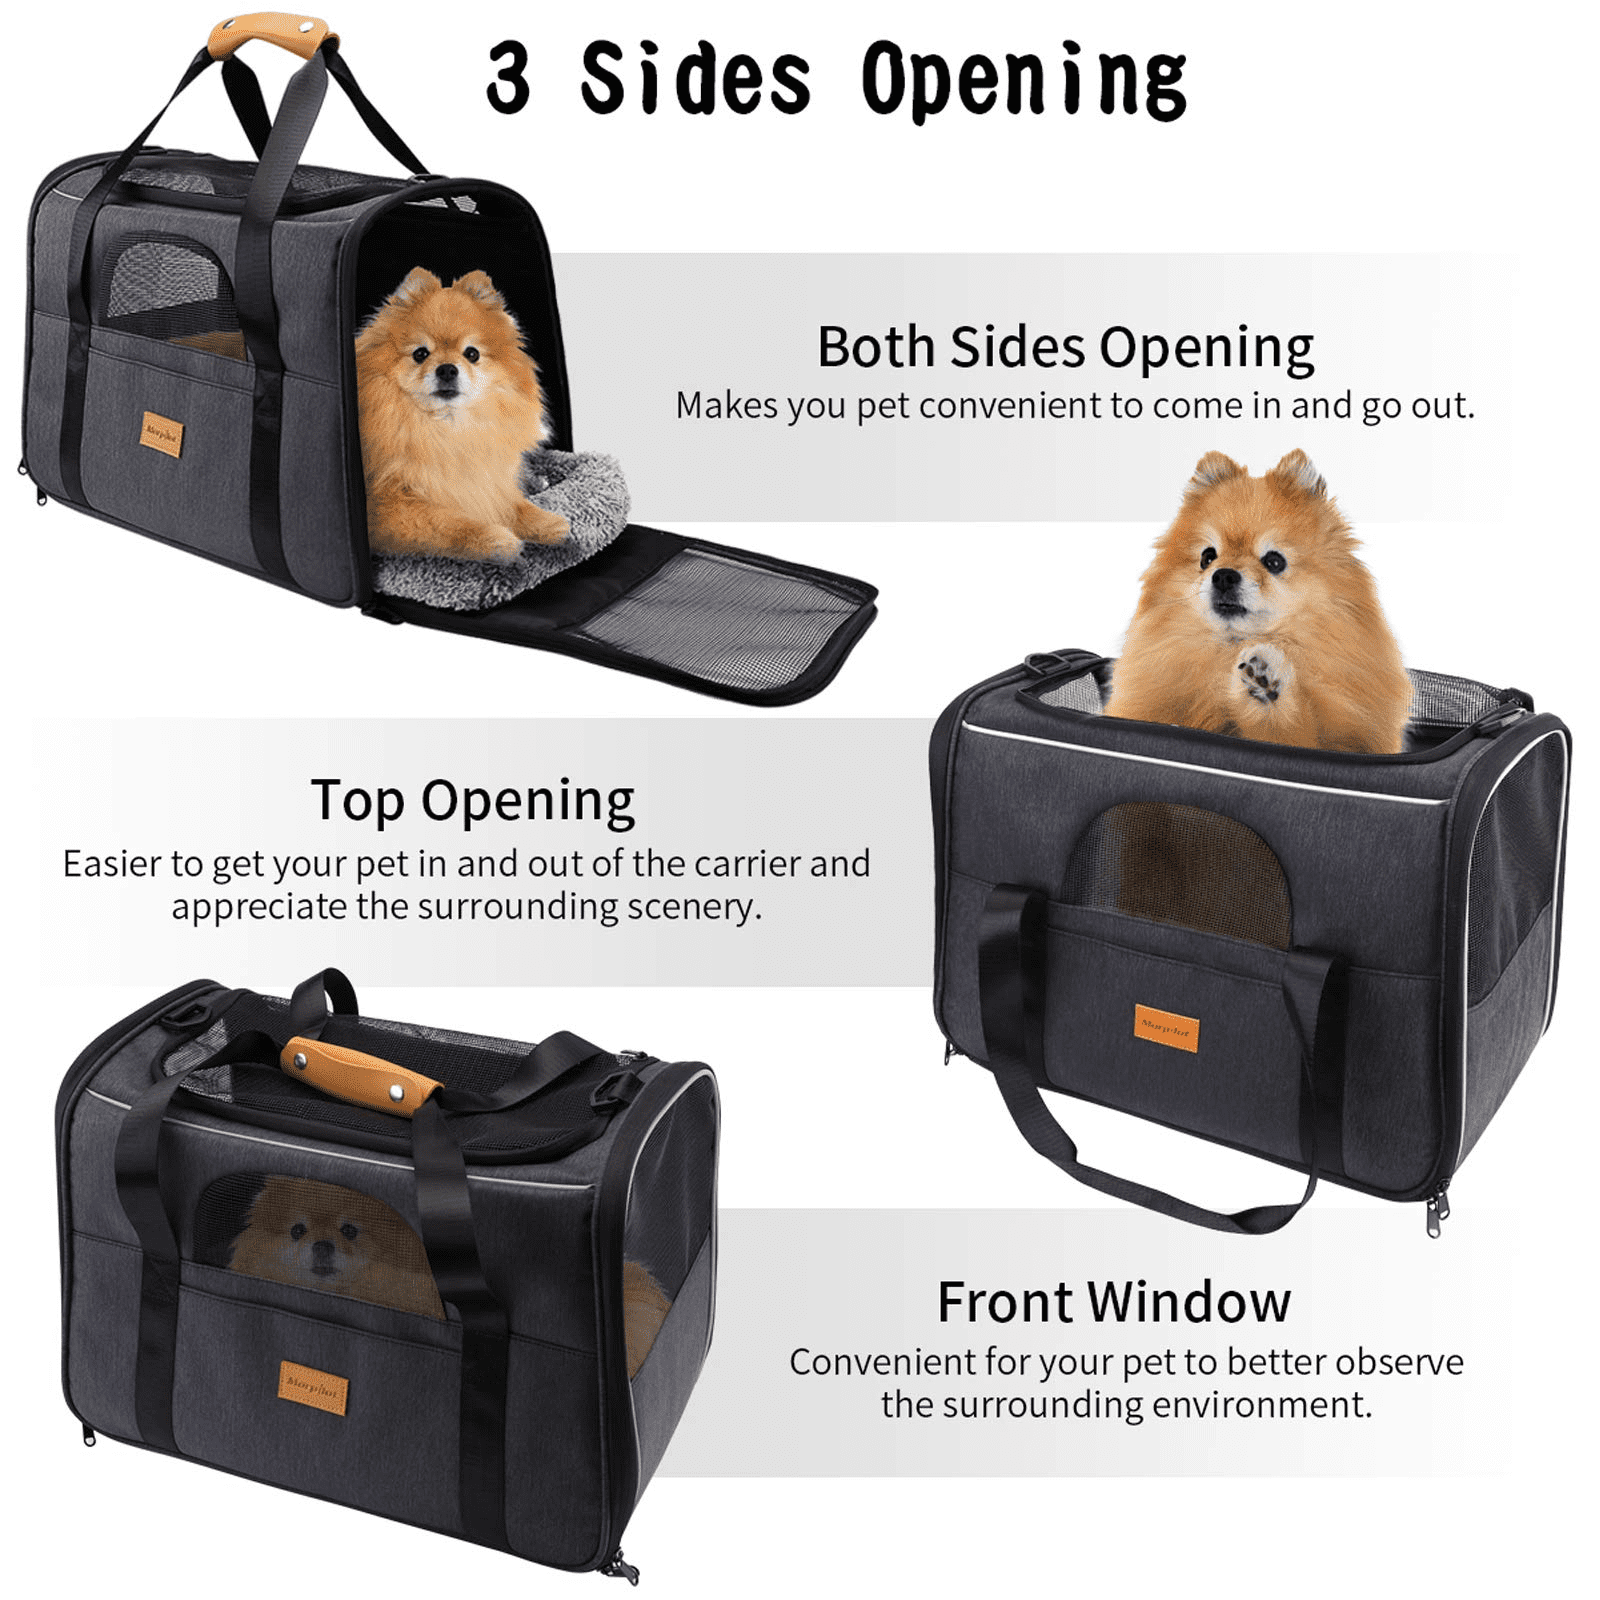 Morpilot Portable Cat Carrier - Soft Sided Cat Carrier for Medium Cats and  Puppy up to 15lbs, Pet Carrier with Locking Safety Zippers, Foldable Bowl